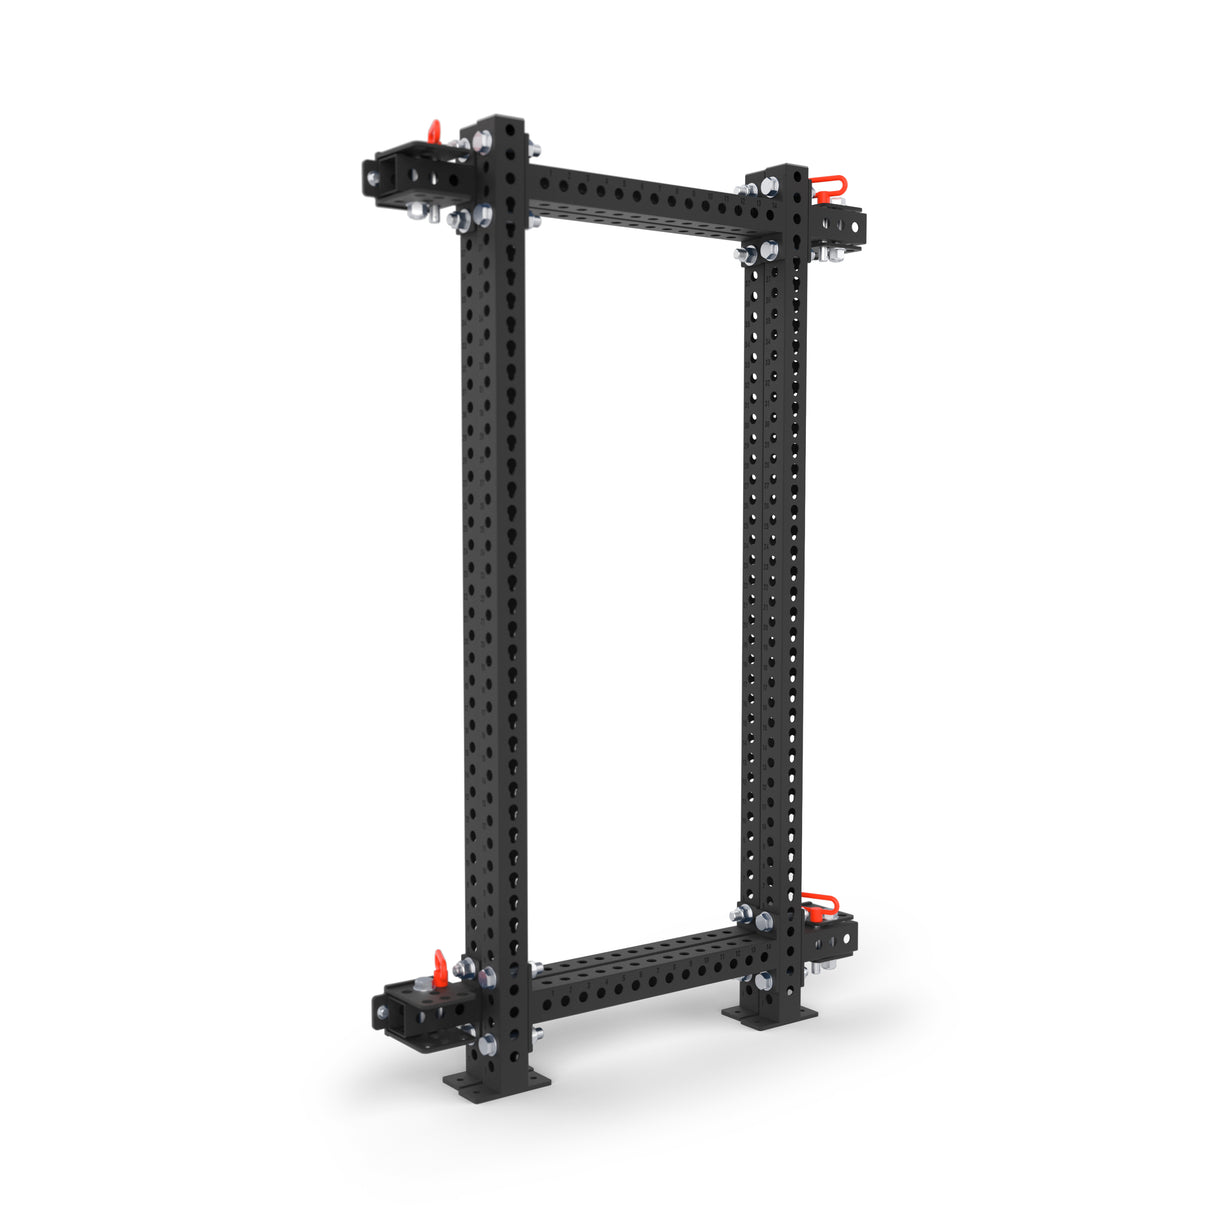 Product picture of the Manticore Folding Power Rack PREBUILT folded